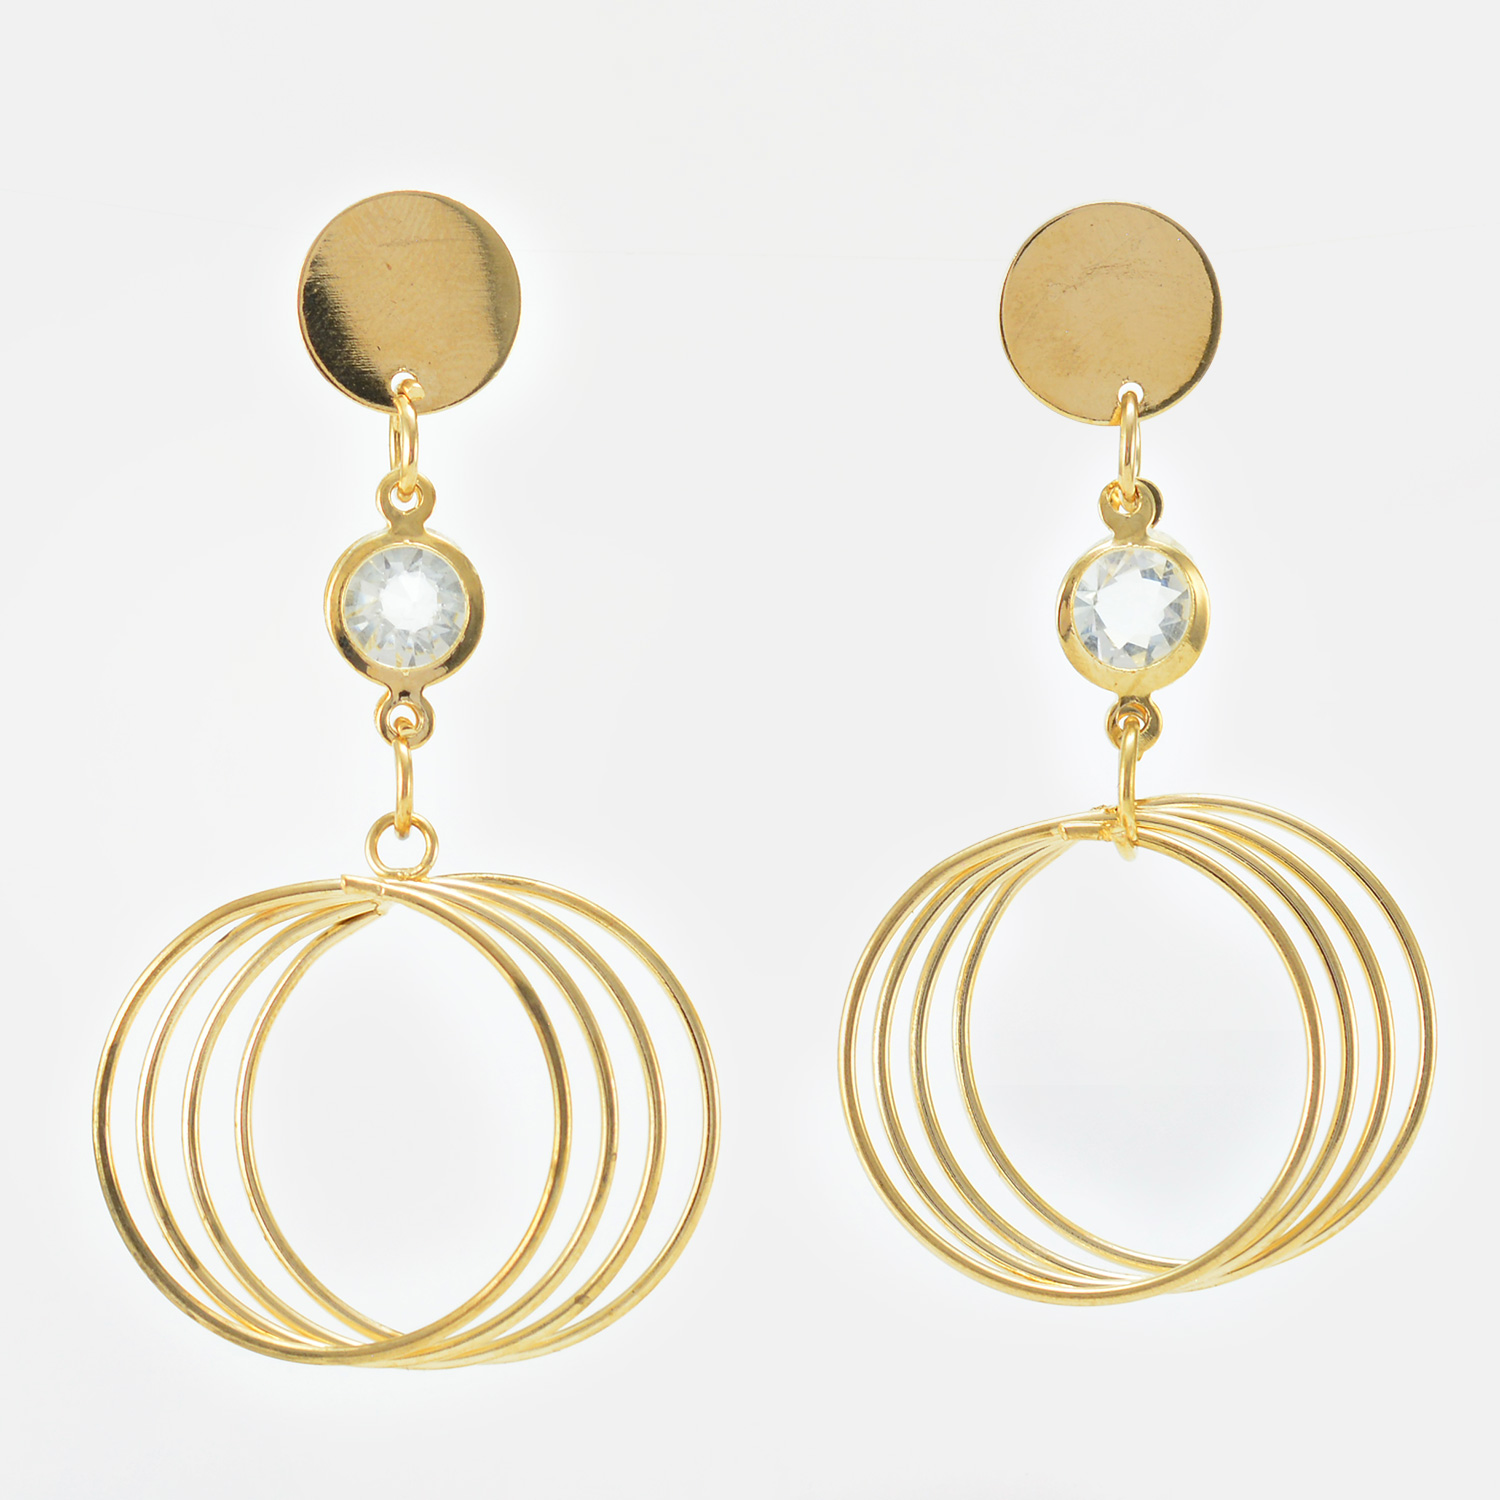 Newly Designer Golden Color Earrings Set With Diamonds